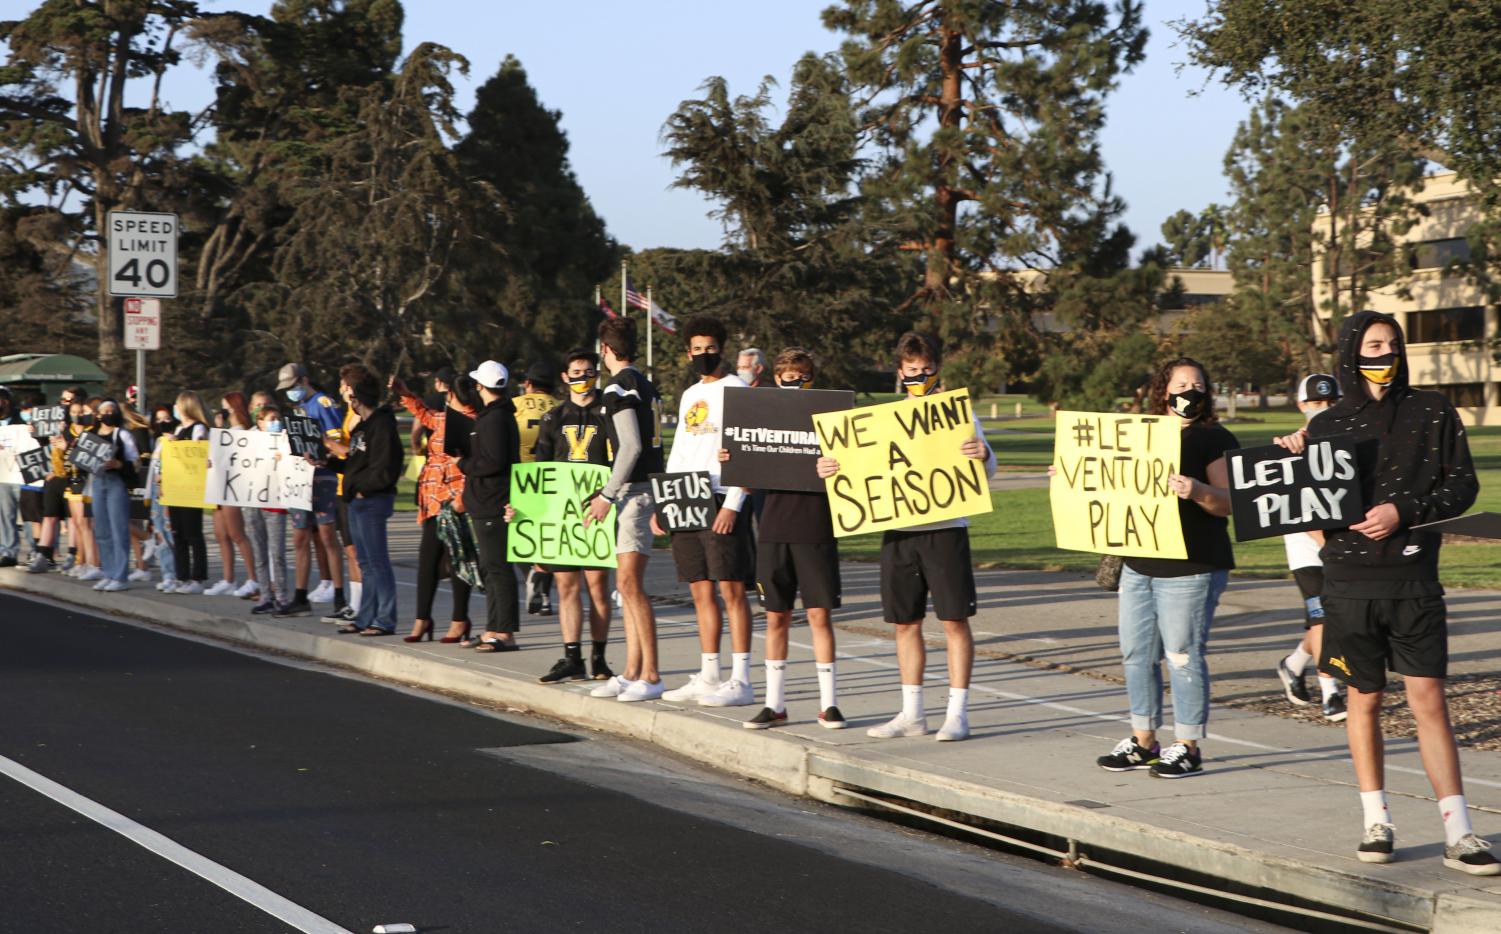 Local Ventura athletes, students and parents gathered in front of the Ventura County Government Center on Nov. 6